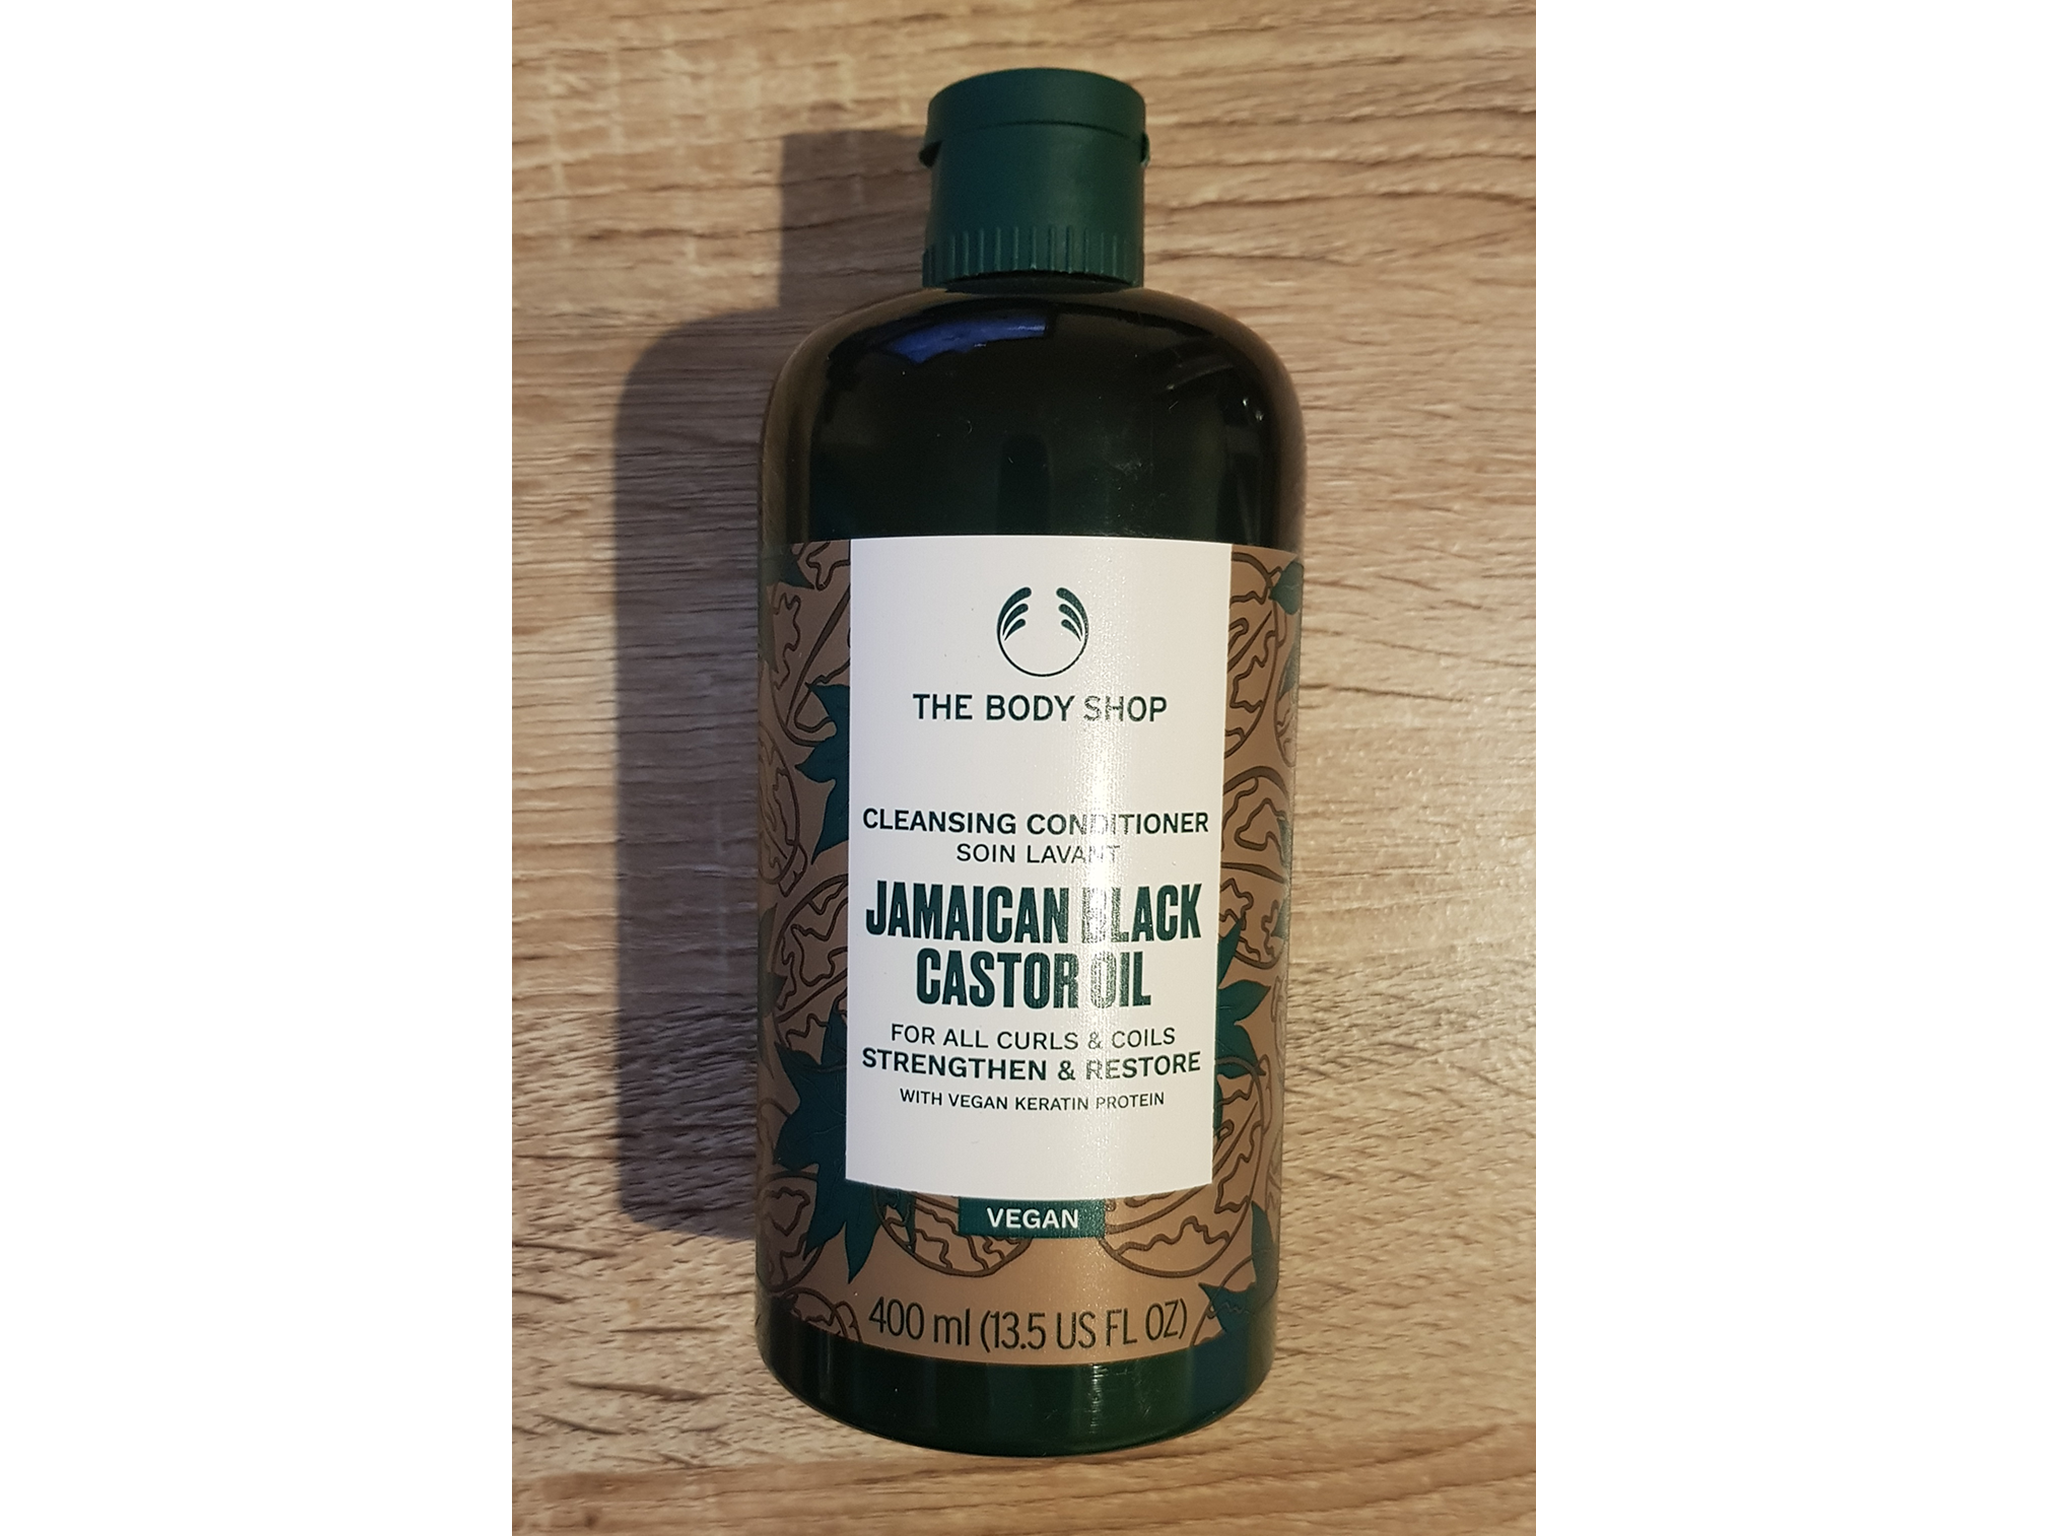 The Body Shop Jamaican black caster oil cleansing conditioner.png